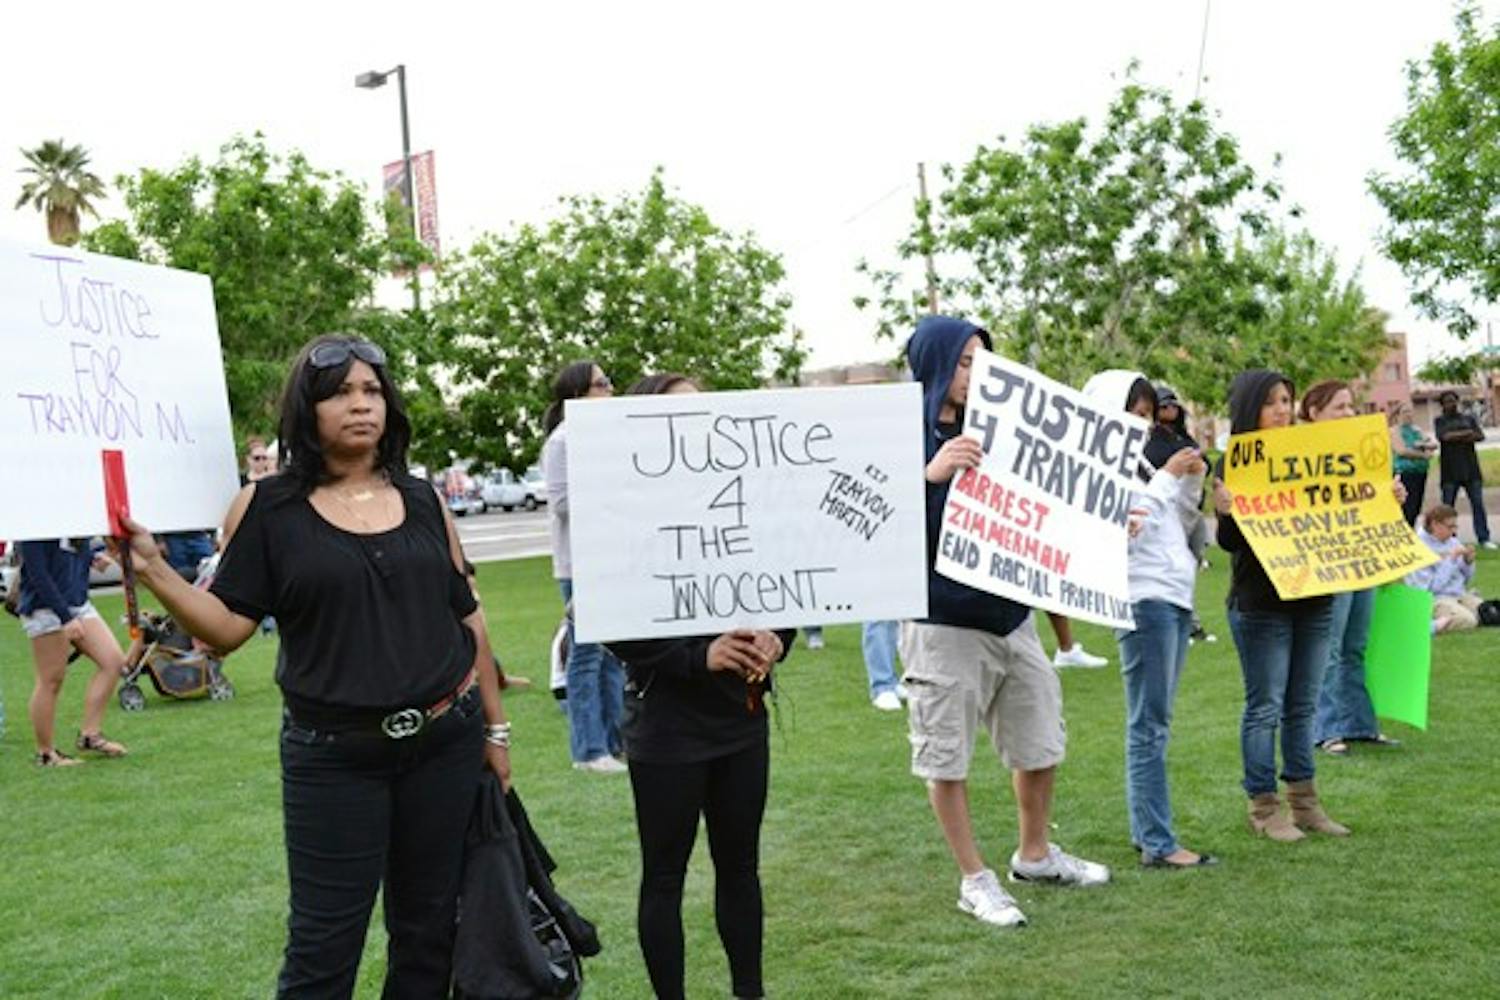 Hundreds of people wearing black hoodies gathered in Civil Space Park to march for justice for Trayvon Martin Sunday evening. (Photo by Mackenzie McCreary)